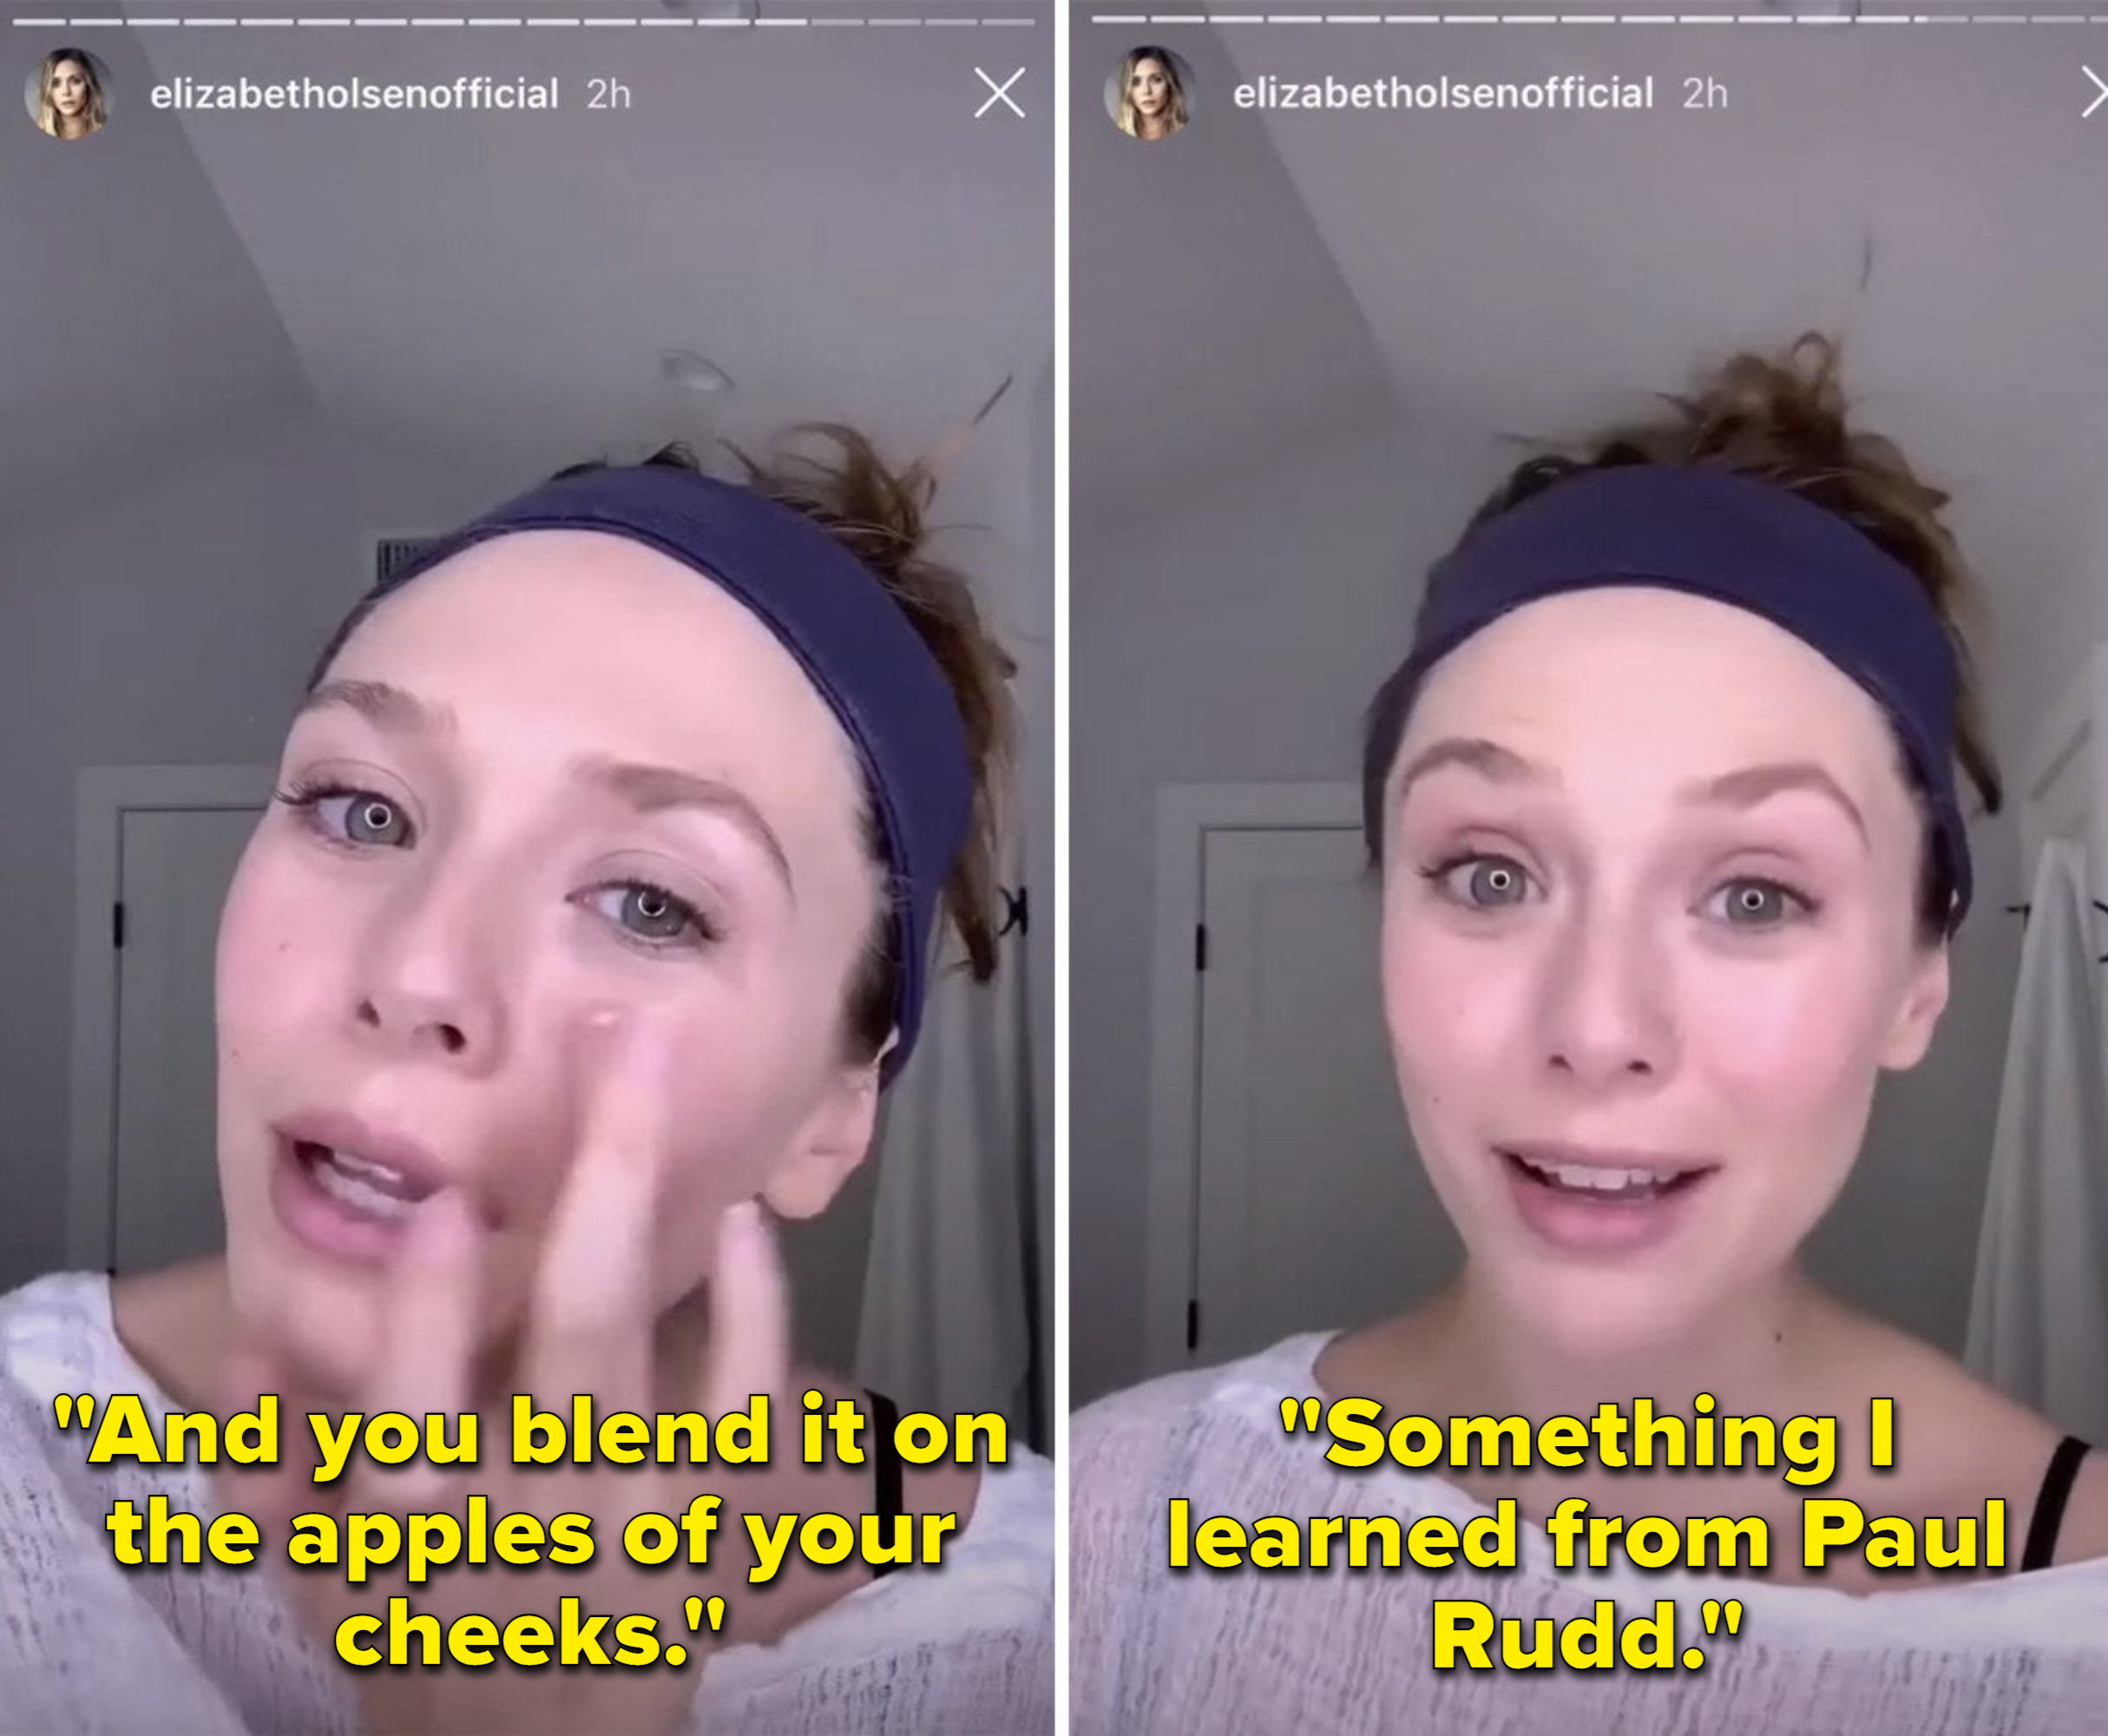 Elizabeth explaining how she learned how to blend makeup on the apple of her cheeks from Paul Rudd